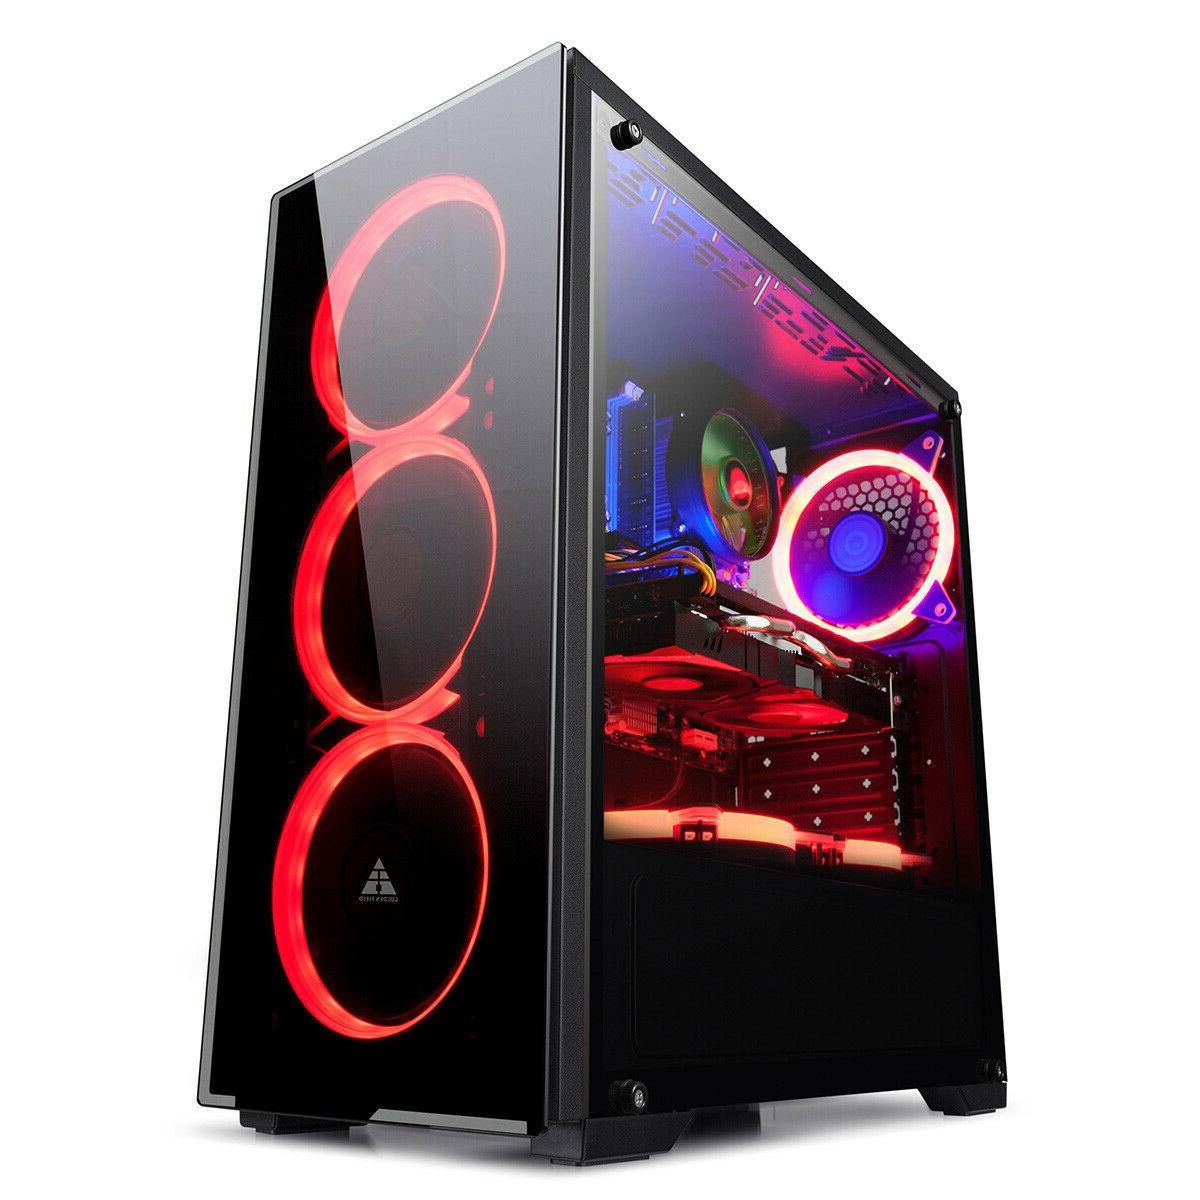 Golden Field N17 Computer Case with 3 LED Red Fans PC Gaming ATX Case Acrylic Side Panel - Geek Tech